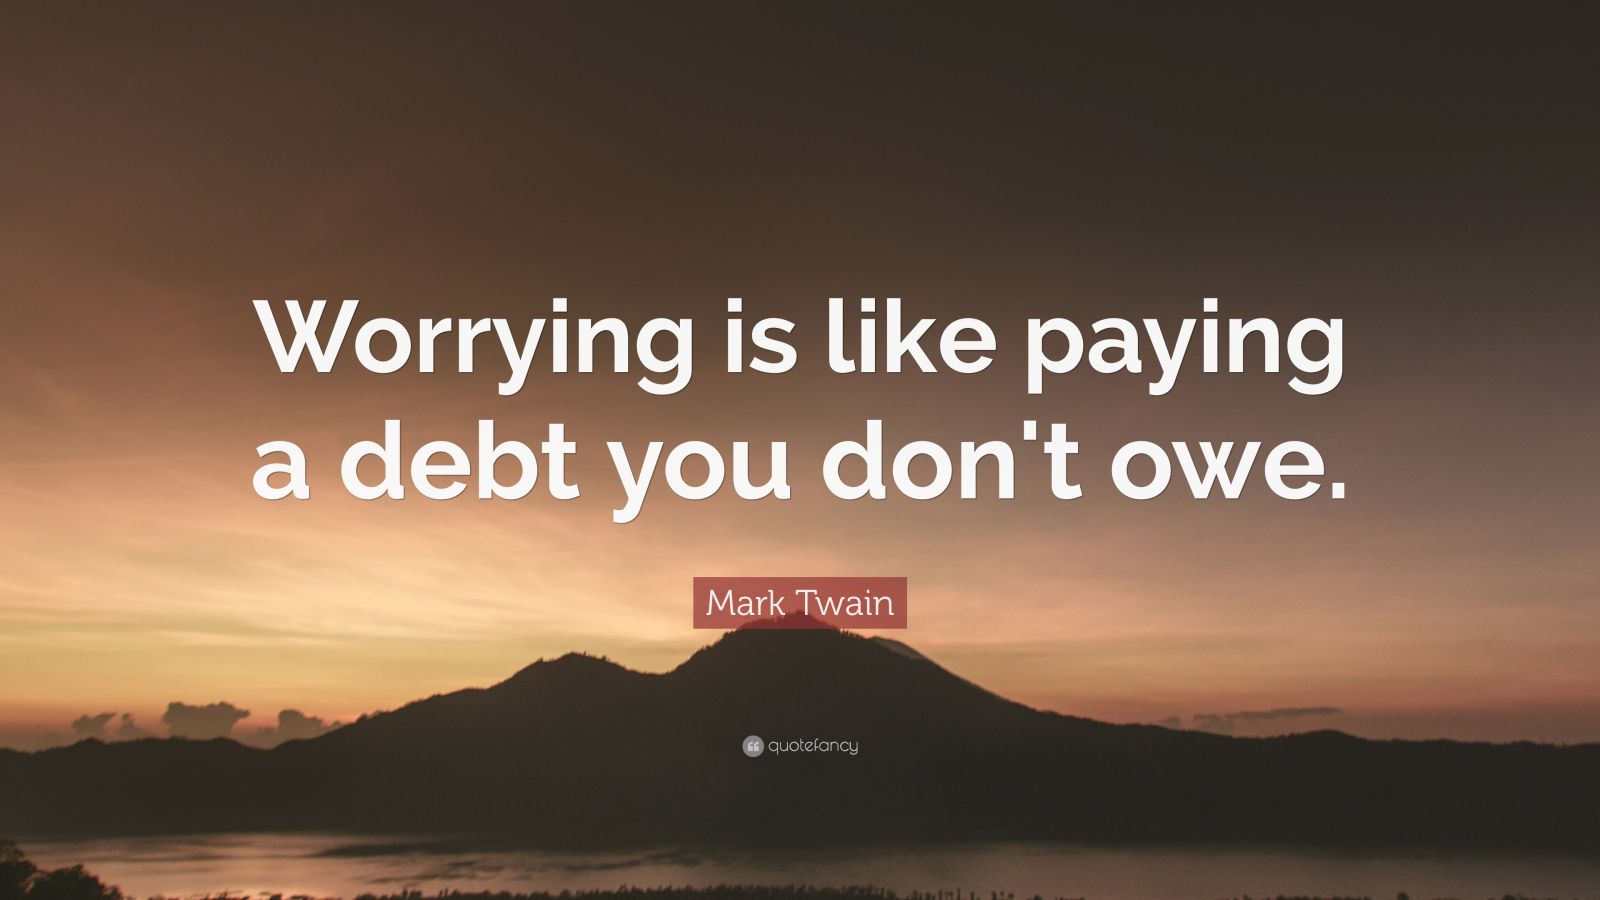 Mark Twain Quote: “Worrying is like paying a debt you don't owe.” (18